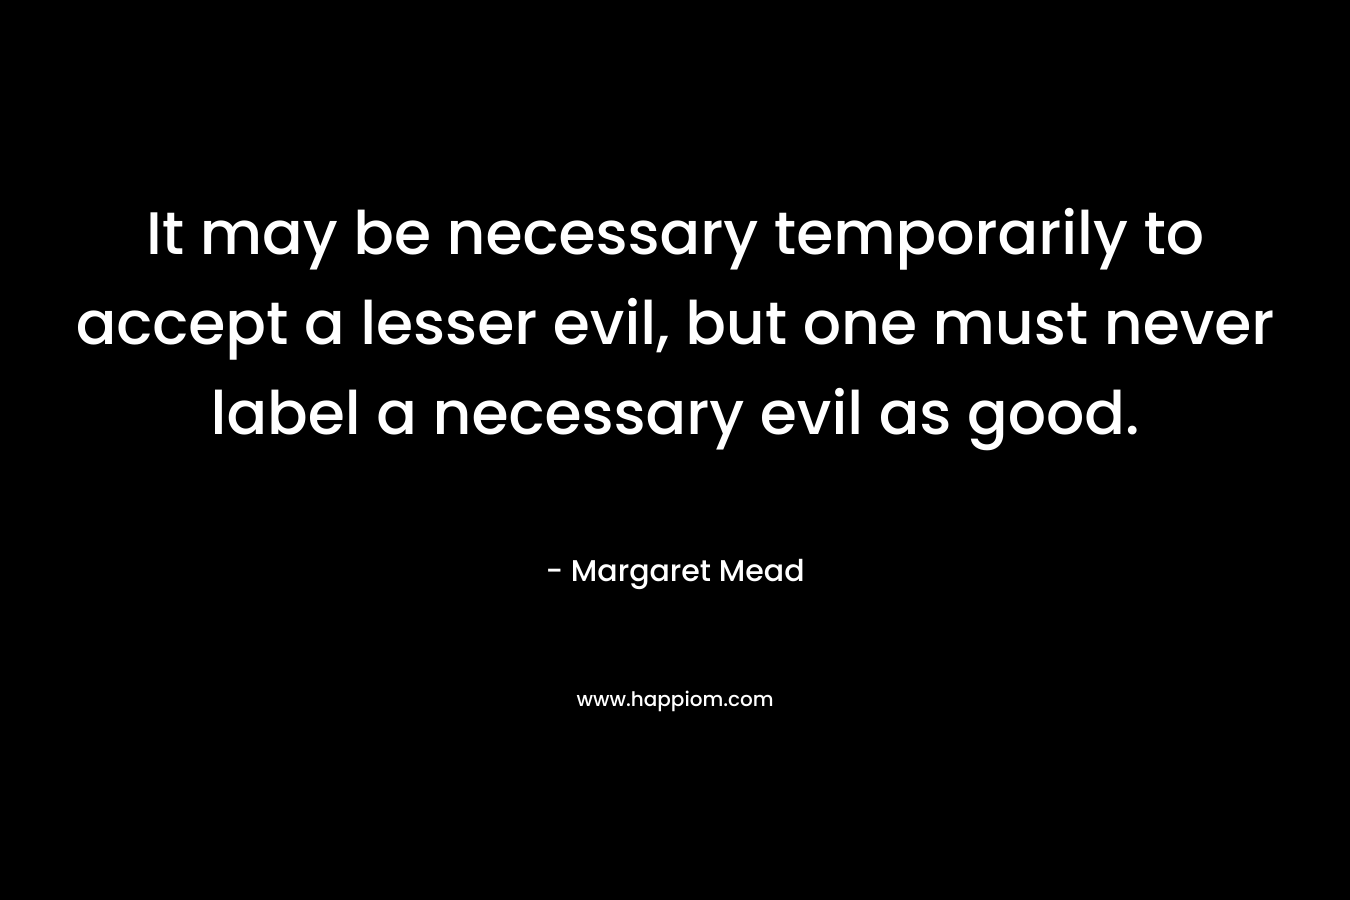 It may be necessary temporarily to accept a lesser evil, but one must never label a necessary evil as good.